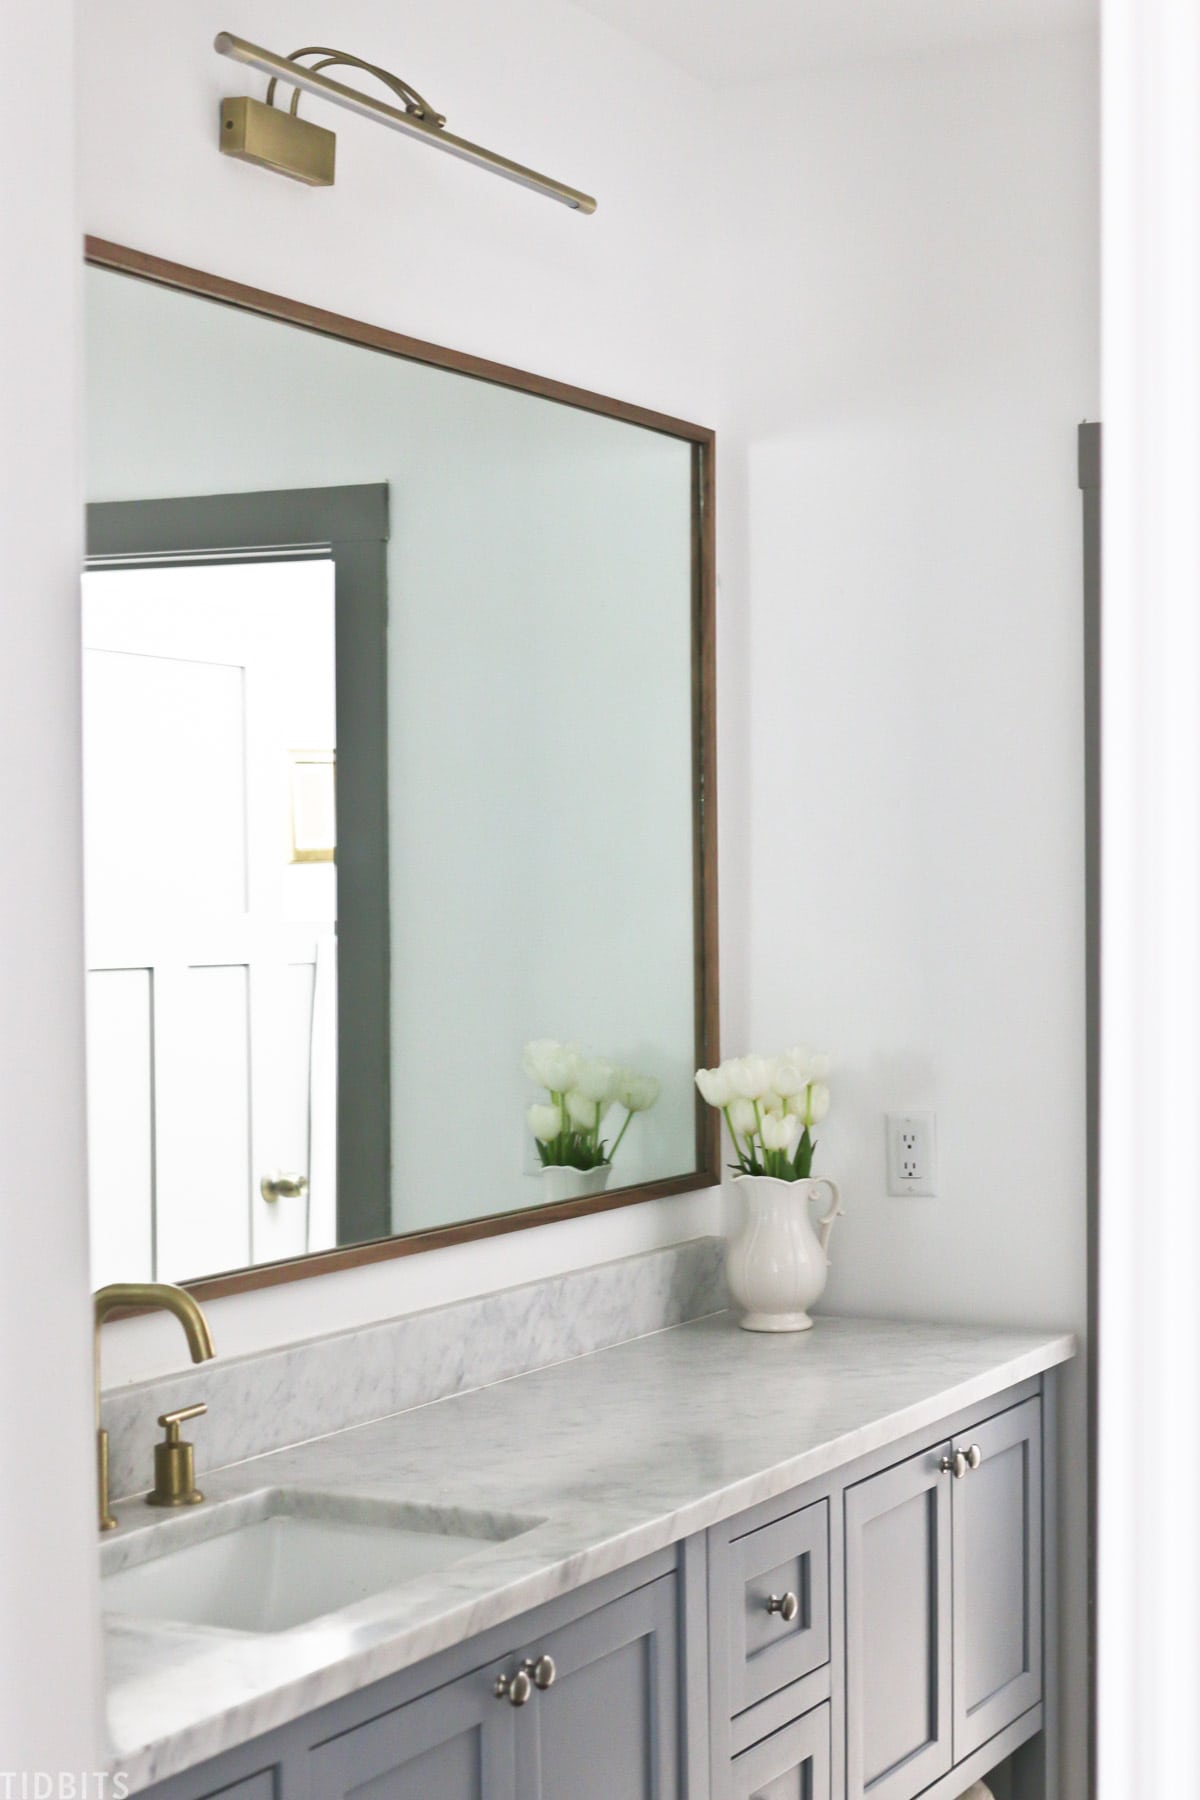 Diy Wood Mirror Frame For Bathroom, How Much Does It Cost To Frame A Bathroom Mirror